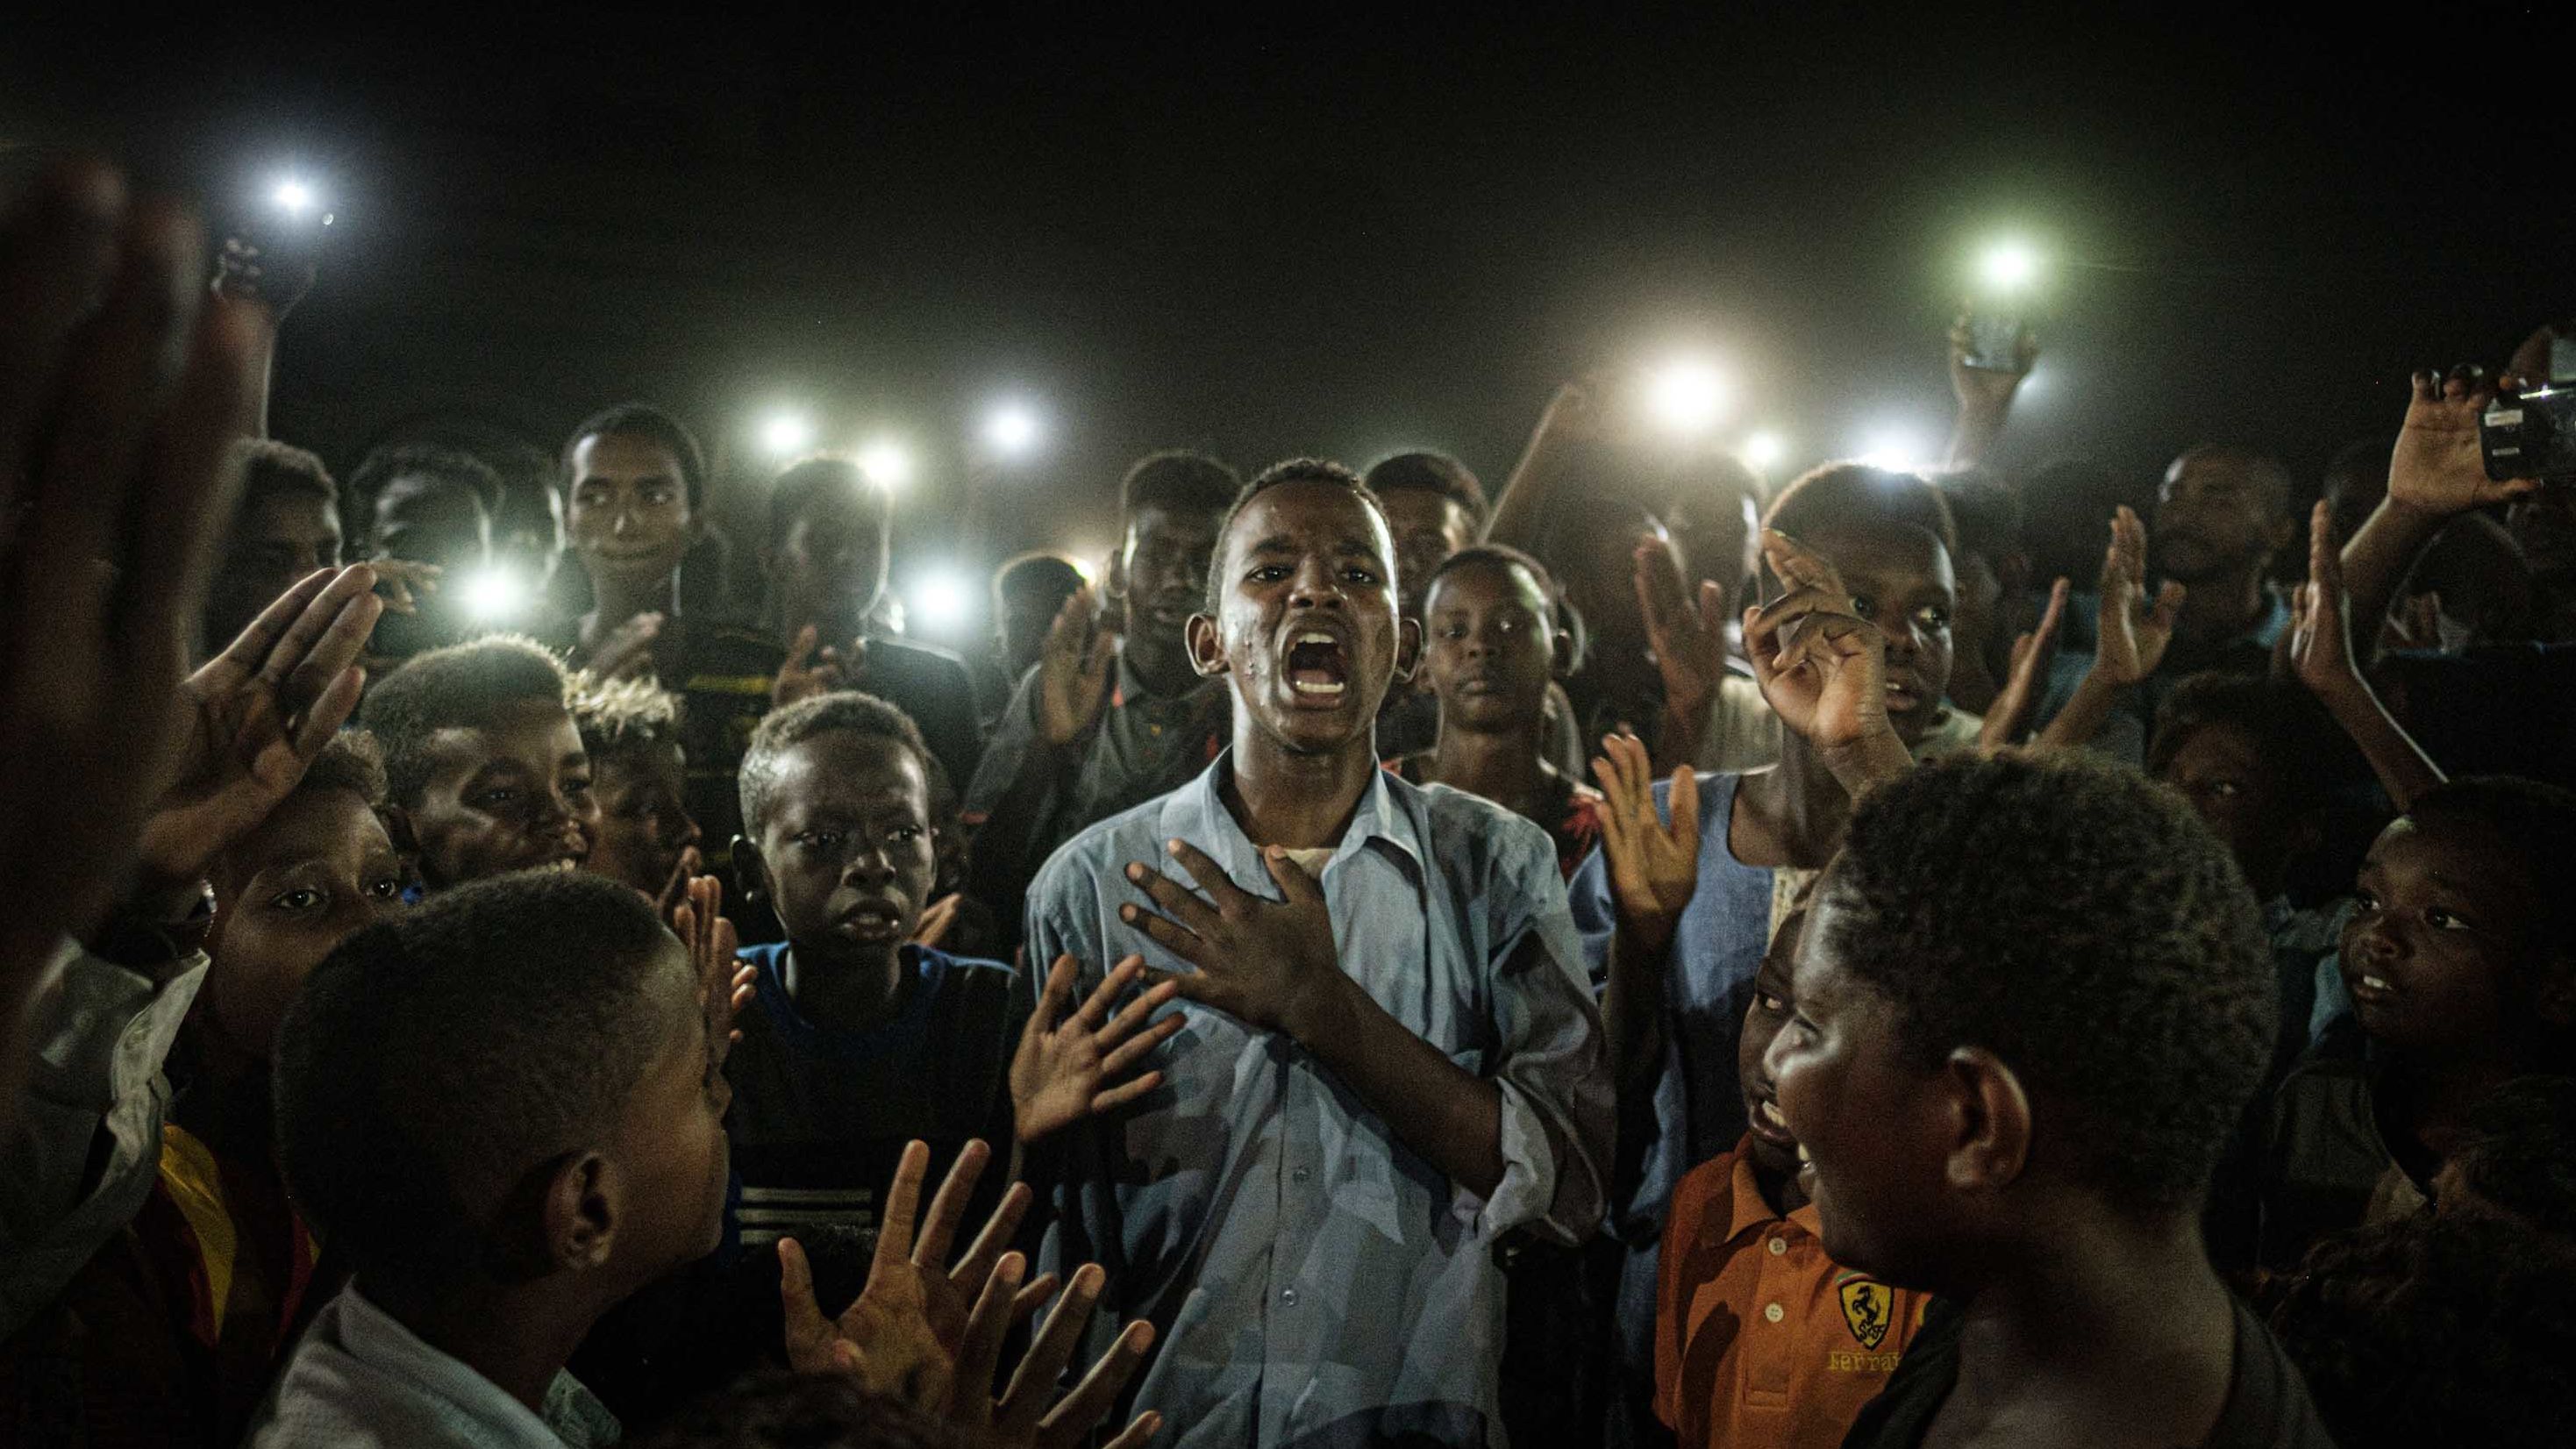 People chant slogans as a young man recites a poem, illuminated by mobile phones on June 19.